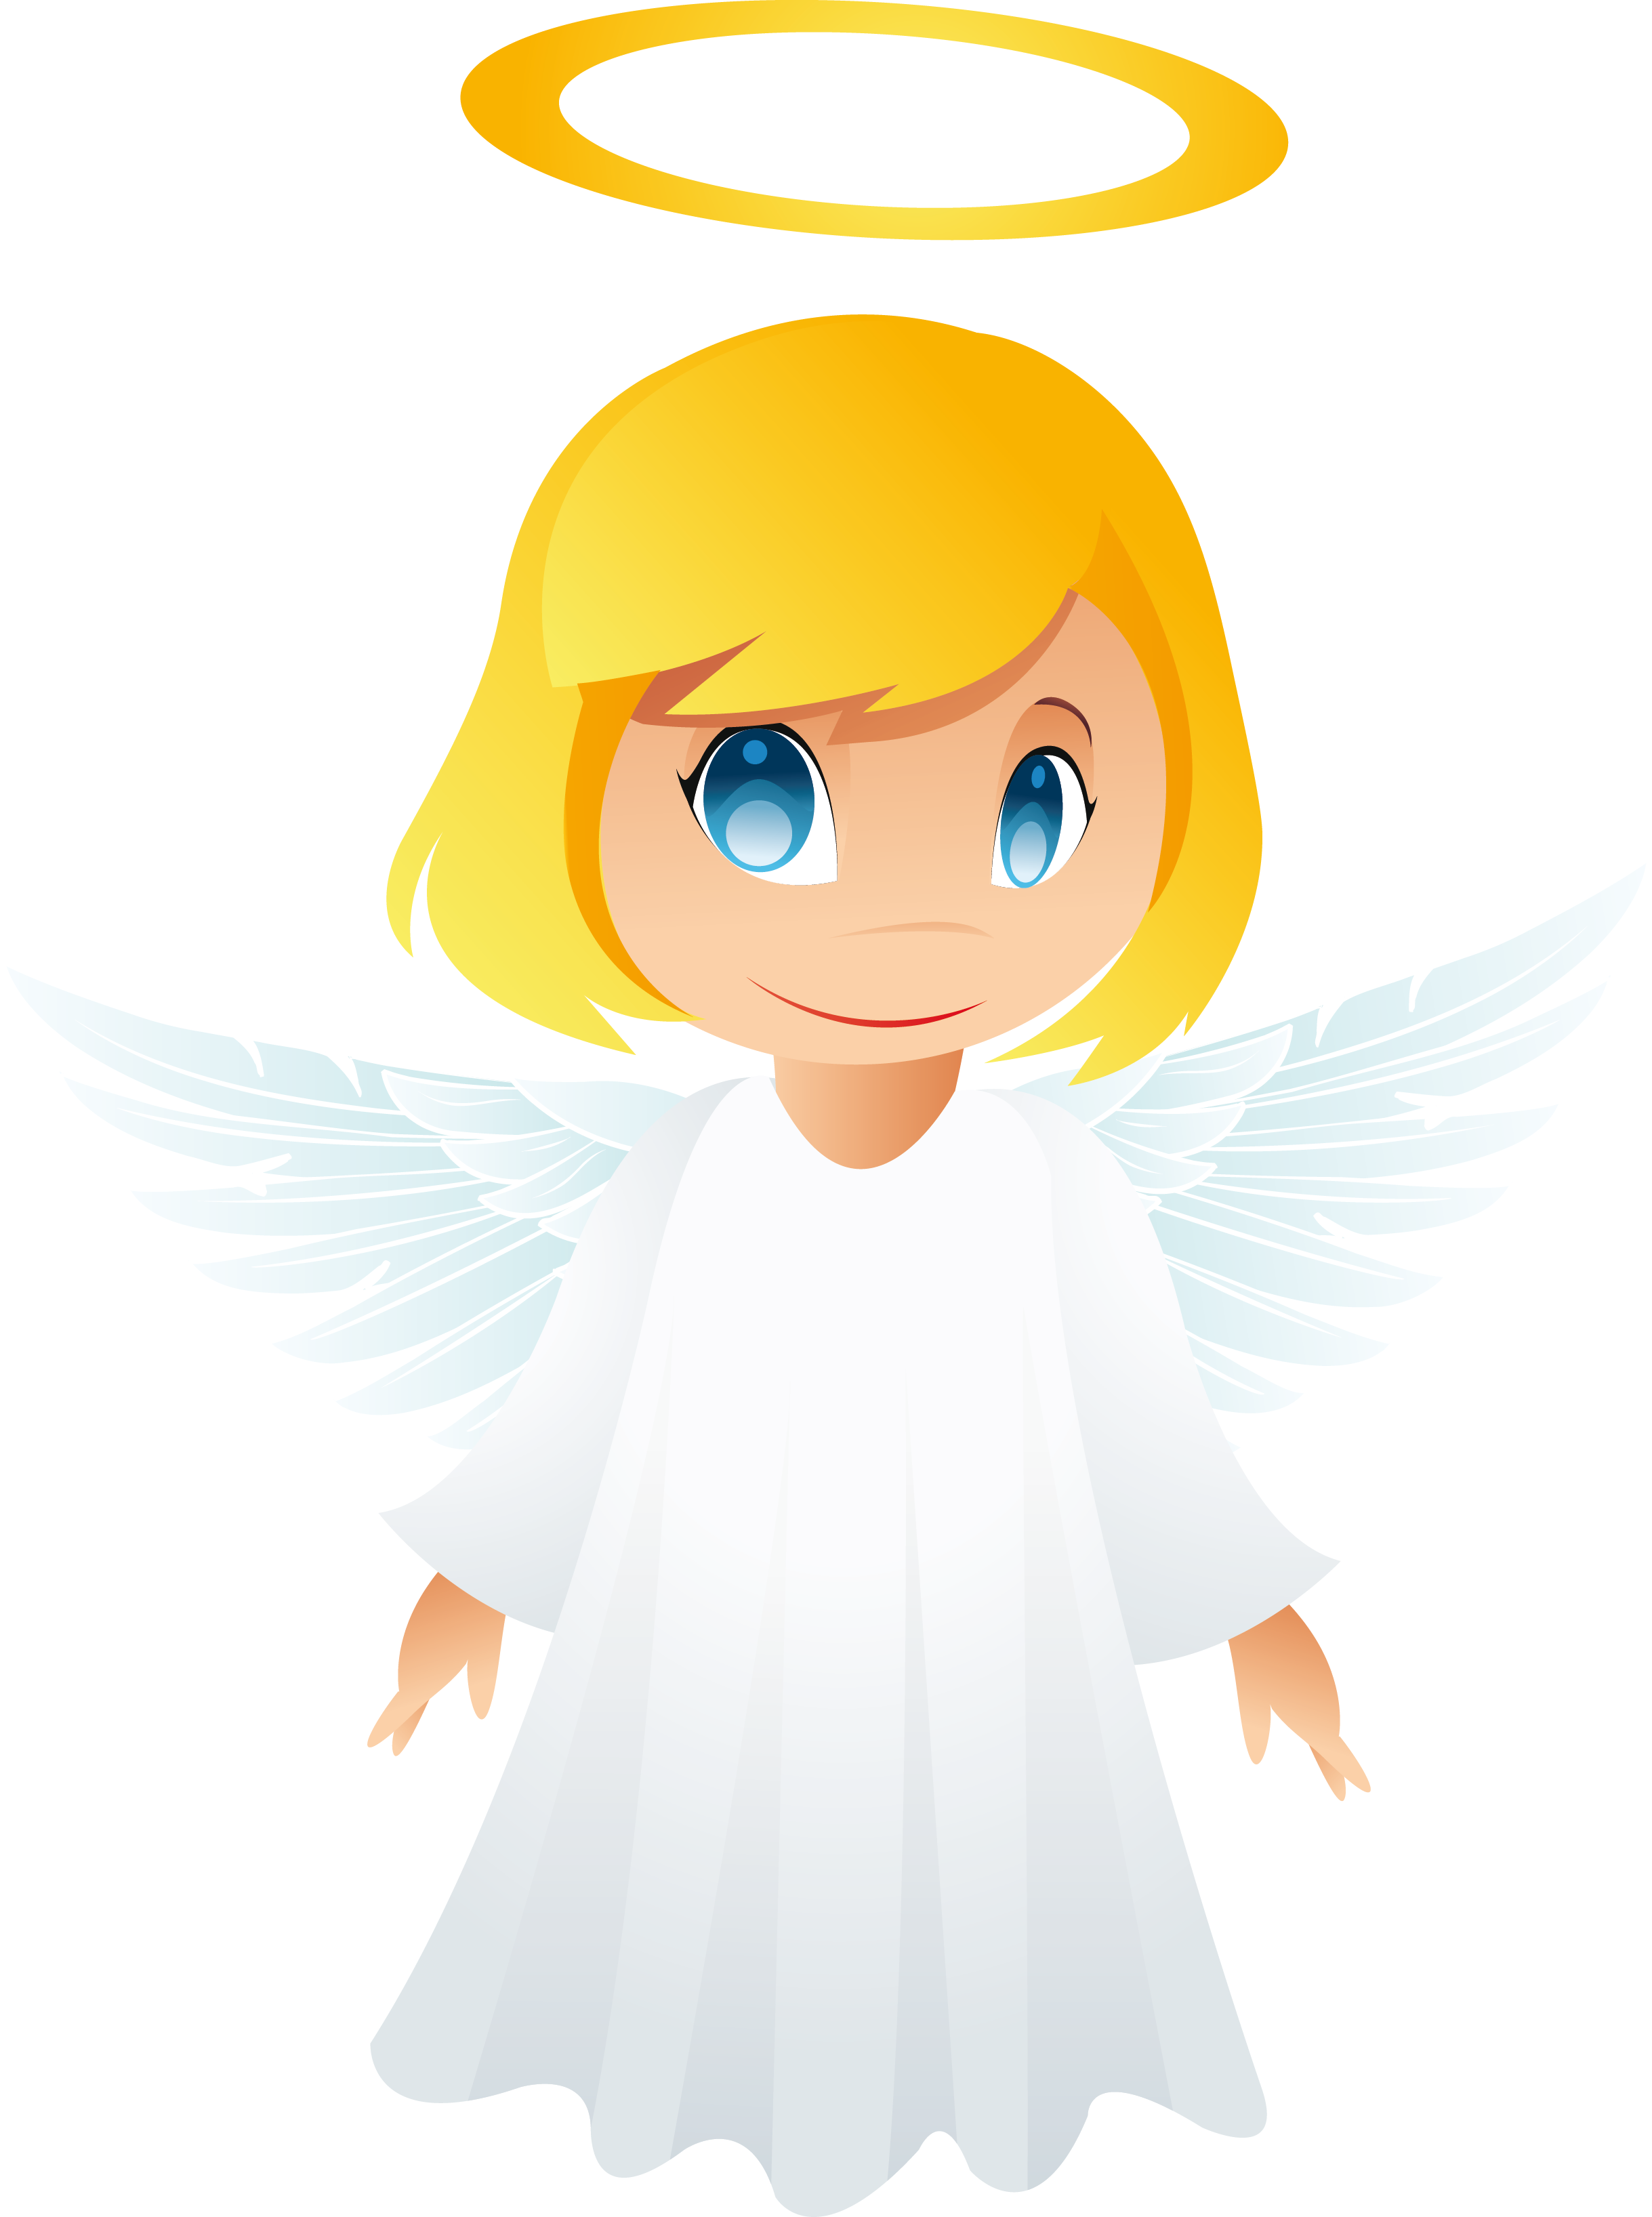 Free Images Of Angels | Free Download Clip Art | Free Clip Art ...